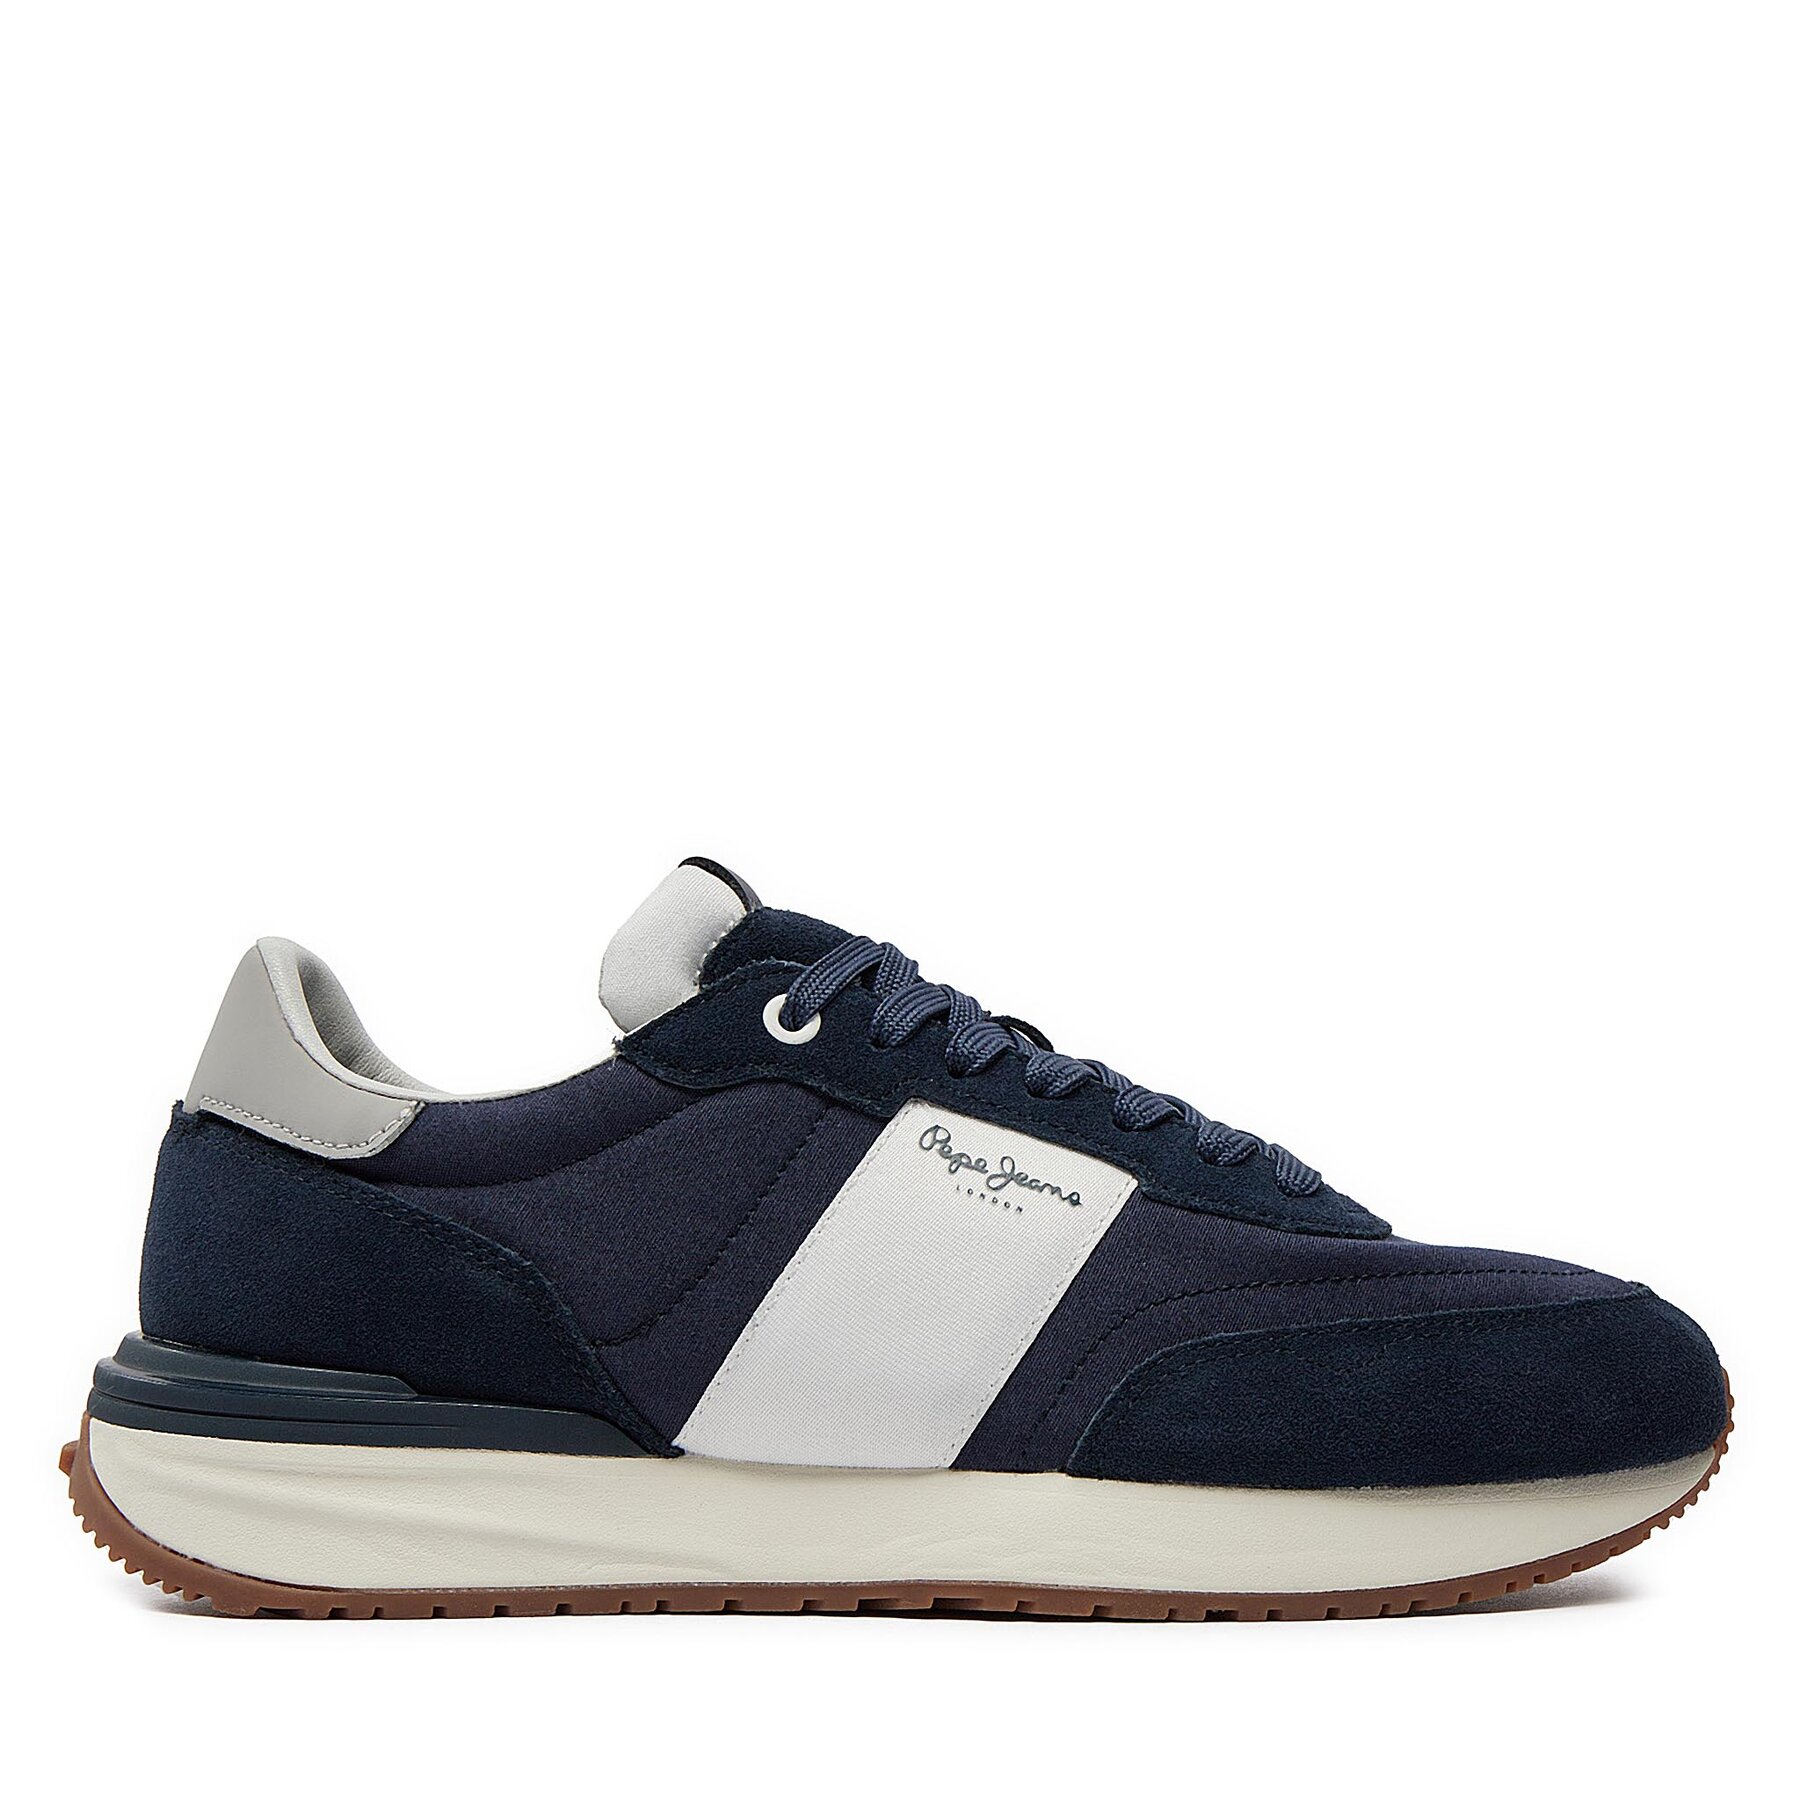 Sneakers Pepe Jeans Buster Tape PMS60006 Navy 595 von Pepe Jeans